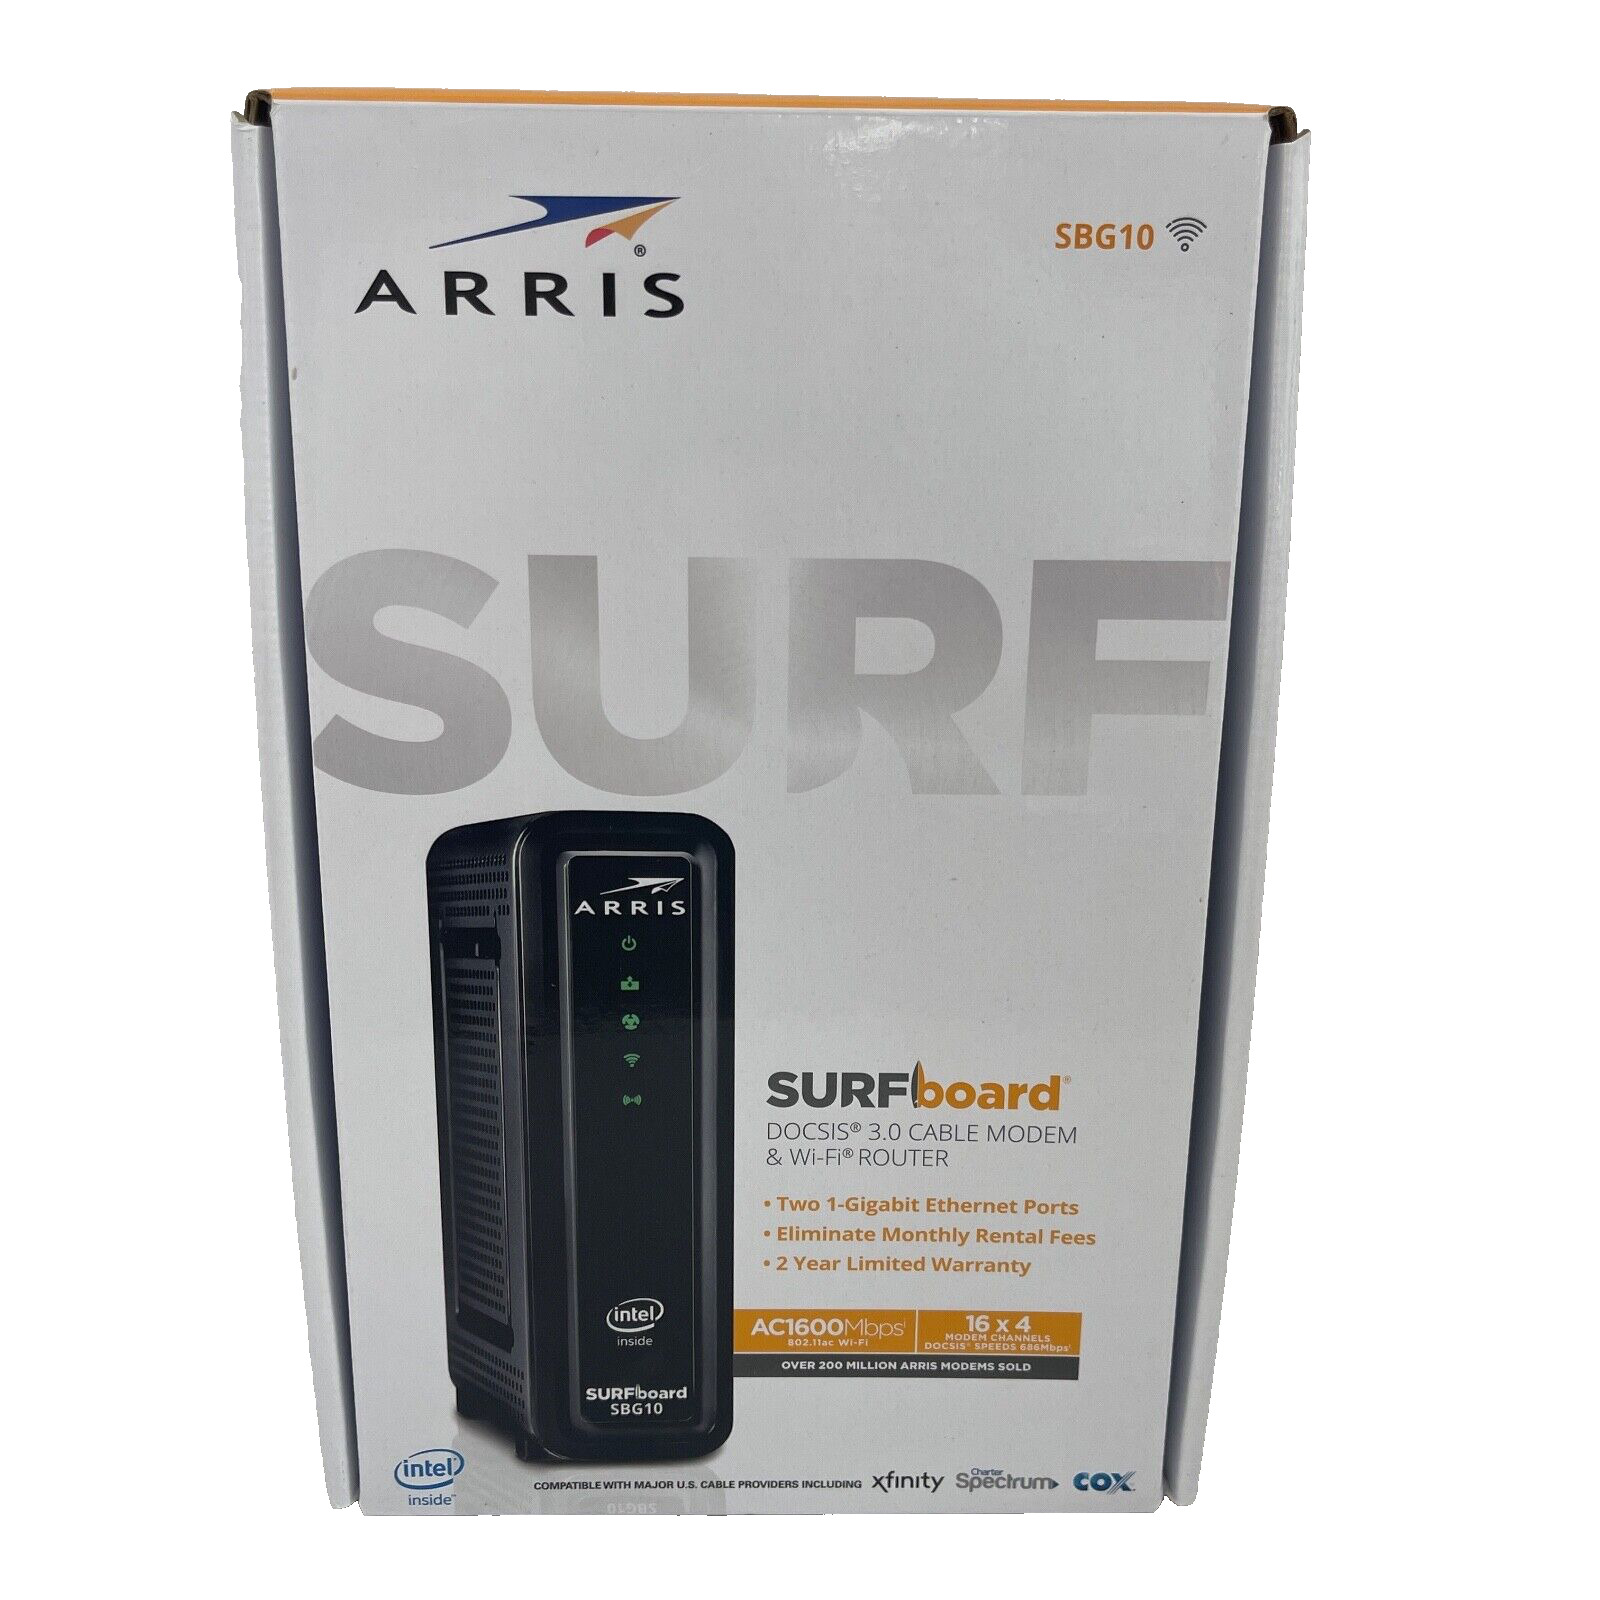 ARRIS SBG10 SURFboard AC1600 Dual-Band Cable Modem Router Black